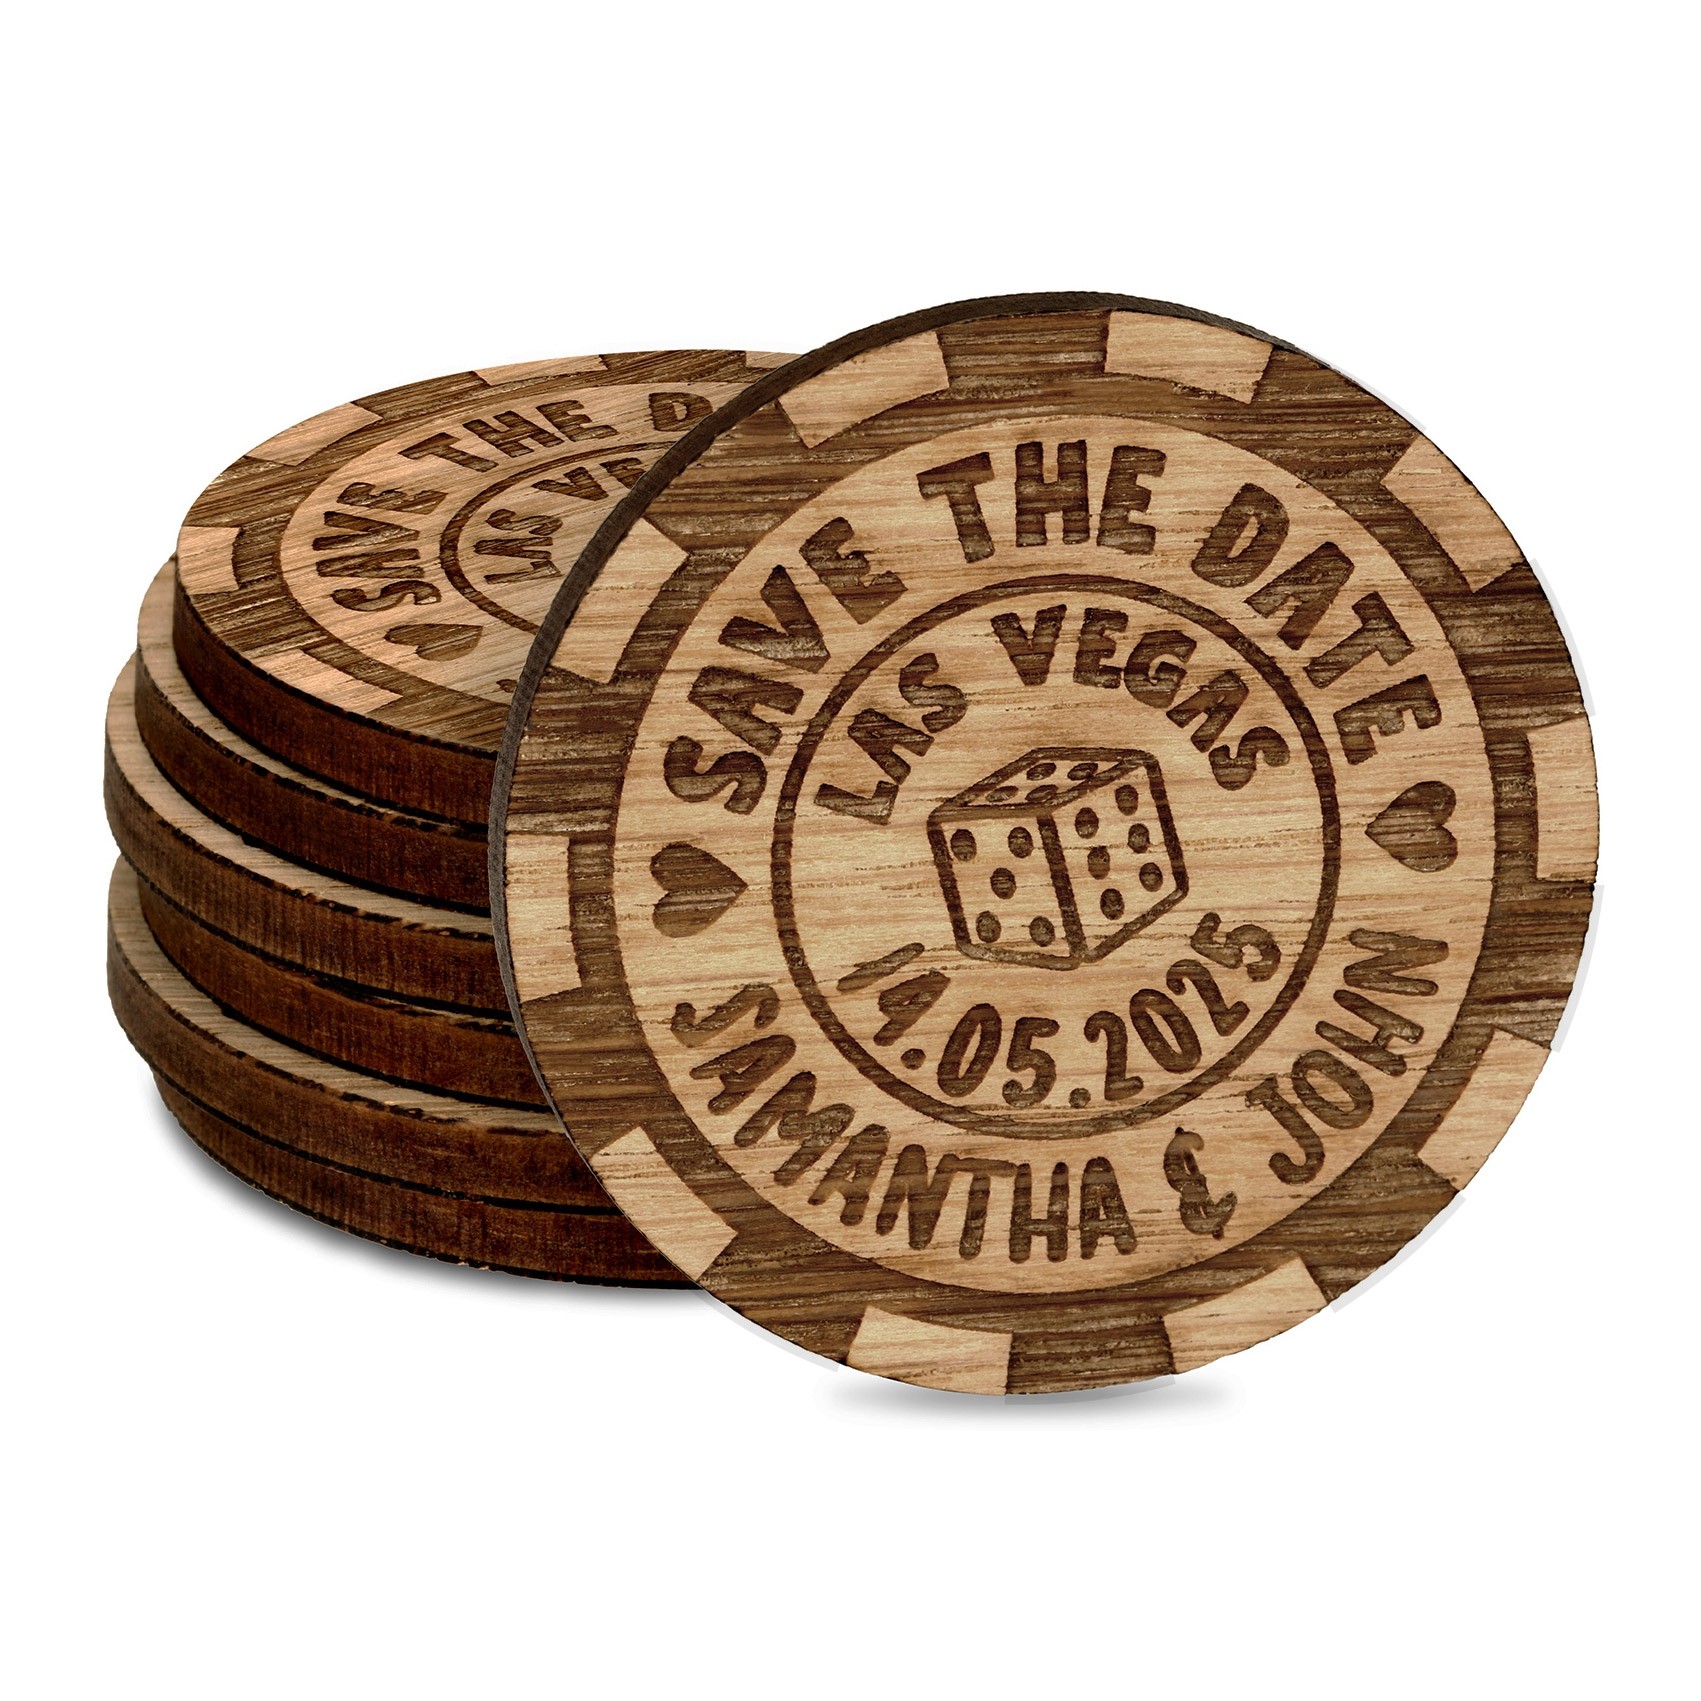 Personalised Wedding Save The Date Invitations Fridge Magnets Cards Las Vegas Poker Chip Casino Wooden Favours Charms Rustic Oak Custom